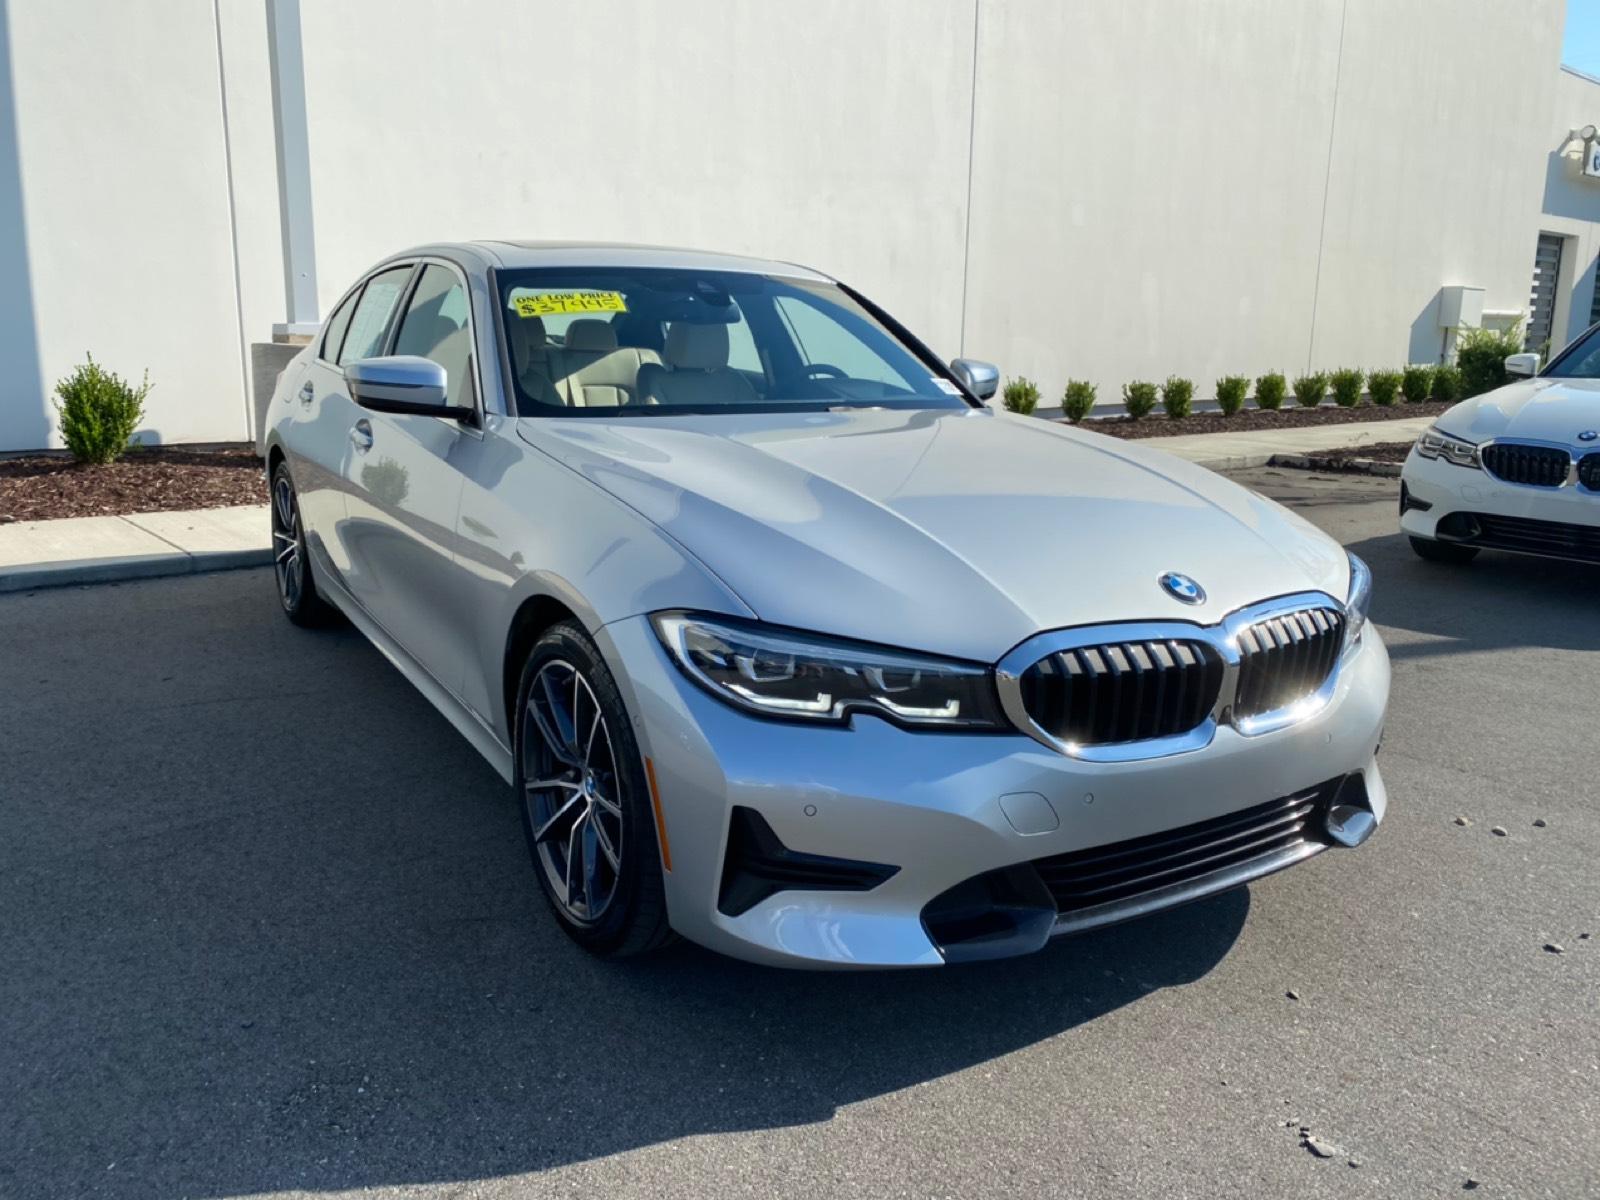 PreOwned 2019 BMW 330i For Sale Wilmington NC P7566